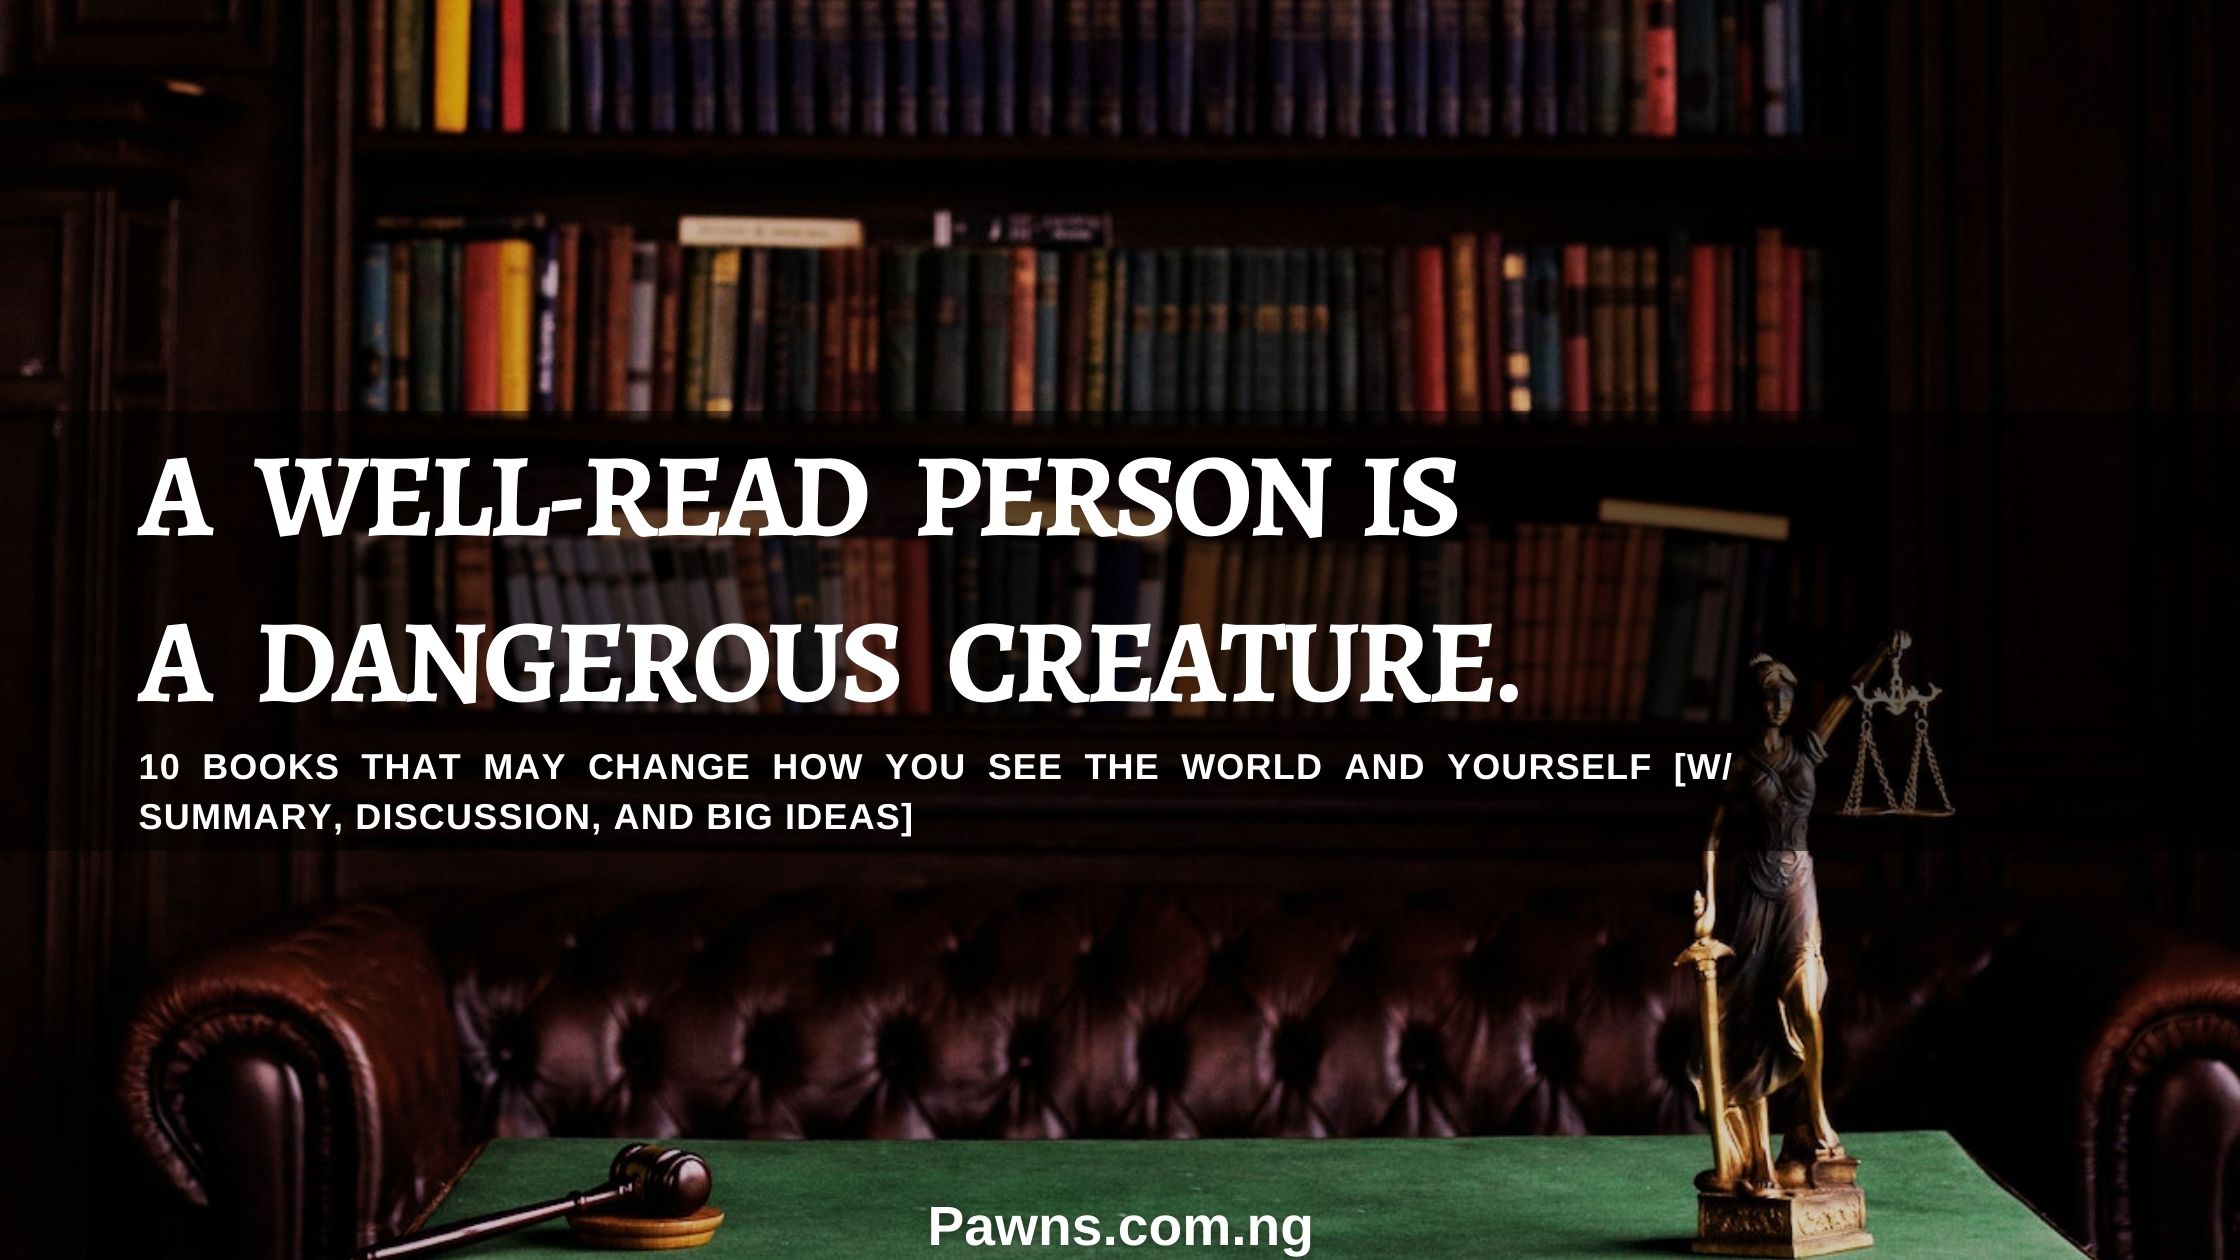 A WELL-READ PERSON IS A DANGEROUS CREATURE 10 BOOKS THAT MAY CHANGE HOW YOU SEE THE WORLD AND YOURSELF [W SUMMARY, DISCUSSION, AND BIG IDEAS]